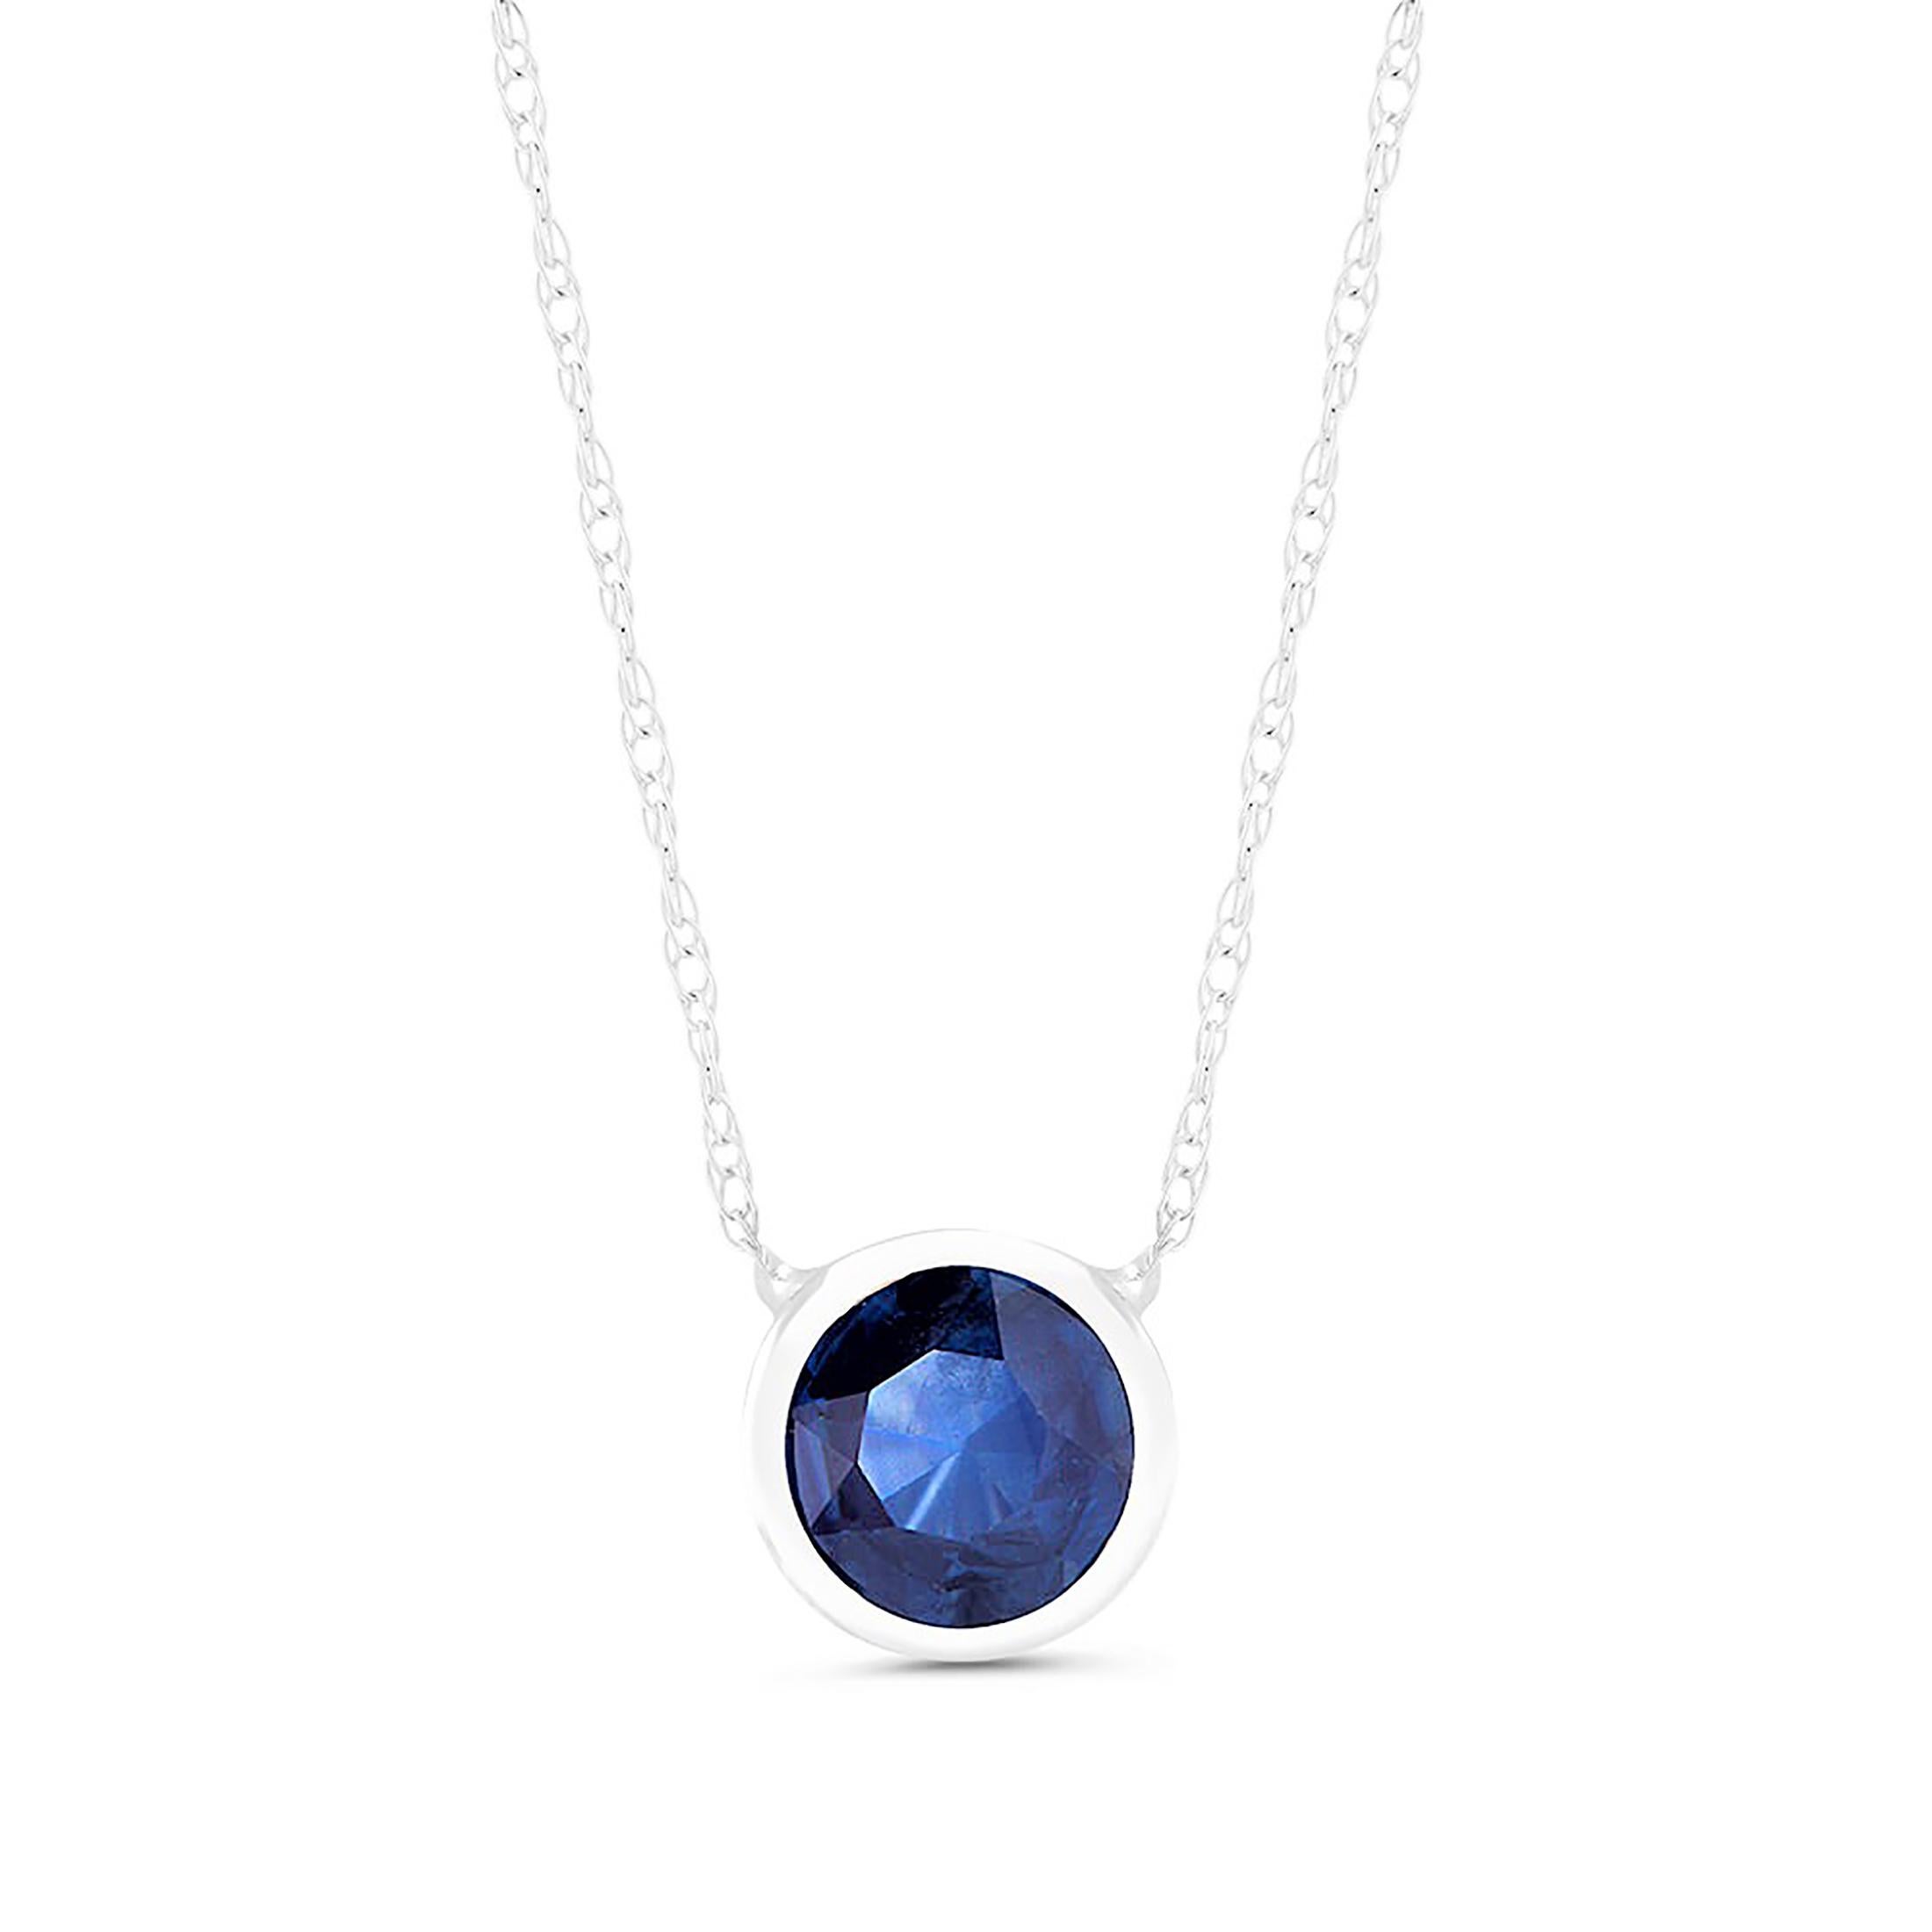 Contemporary White Gold Bezel-Set Sapphire Pendant Necklace Weighing 1.25 Carat